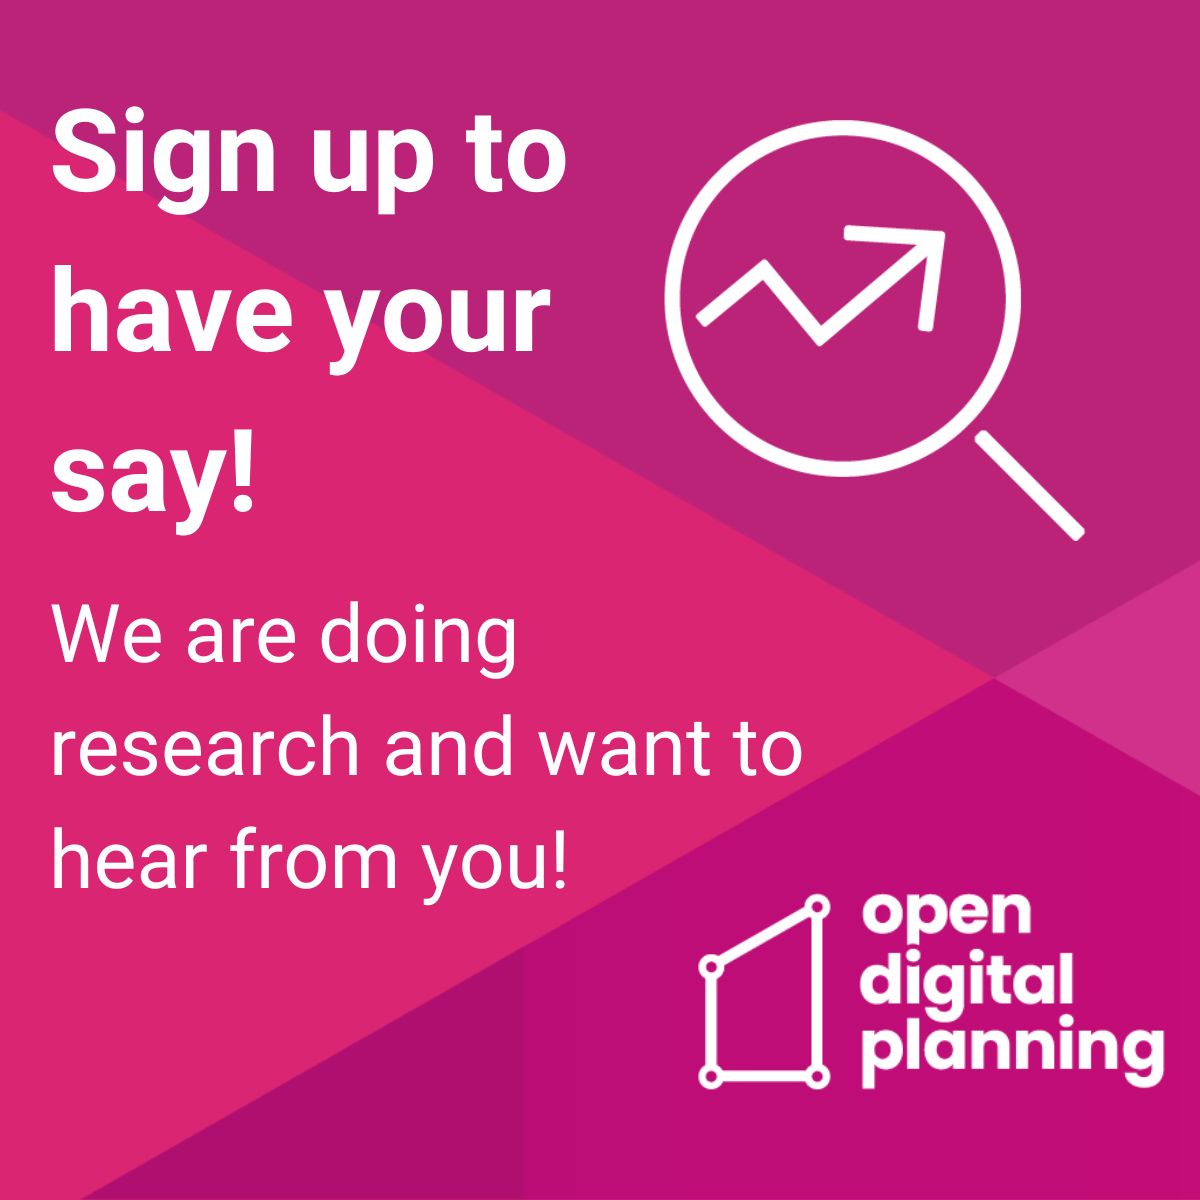 Sign up to have your say